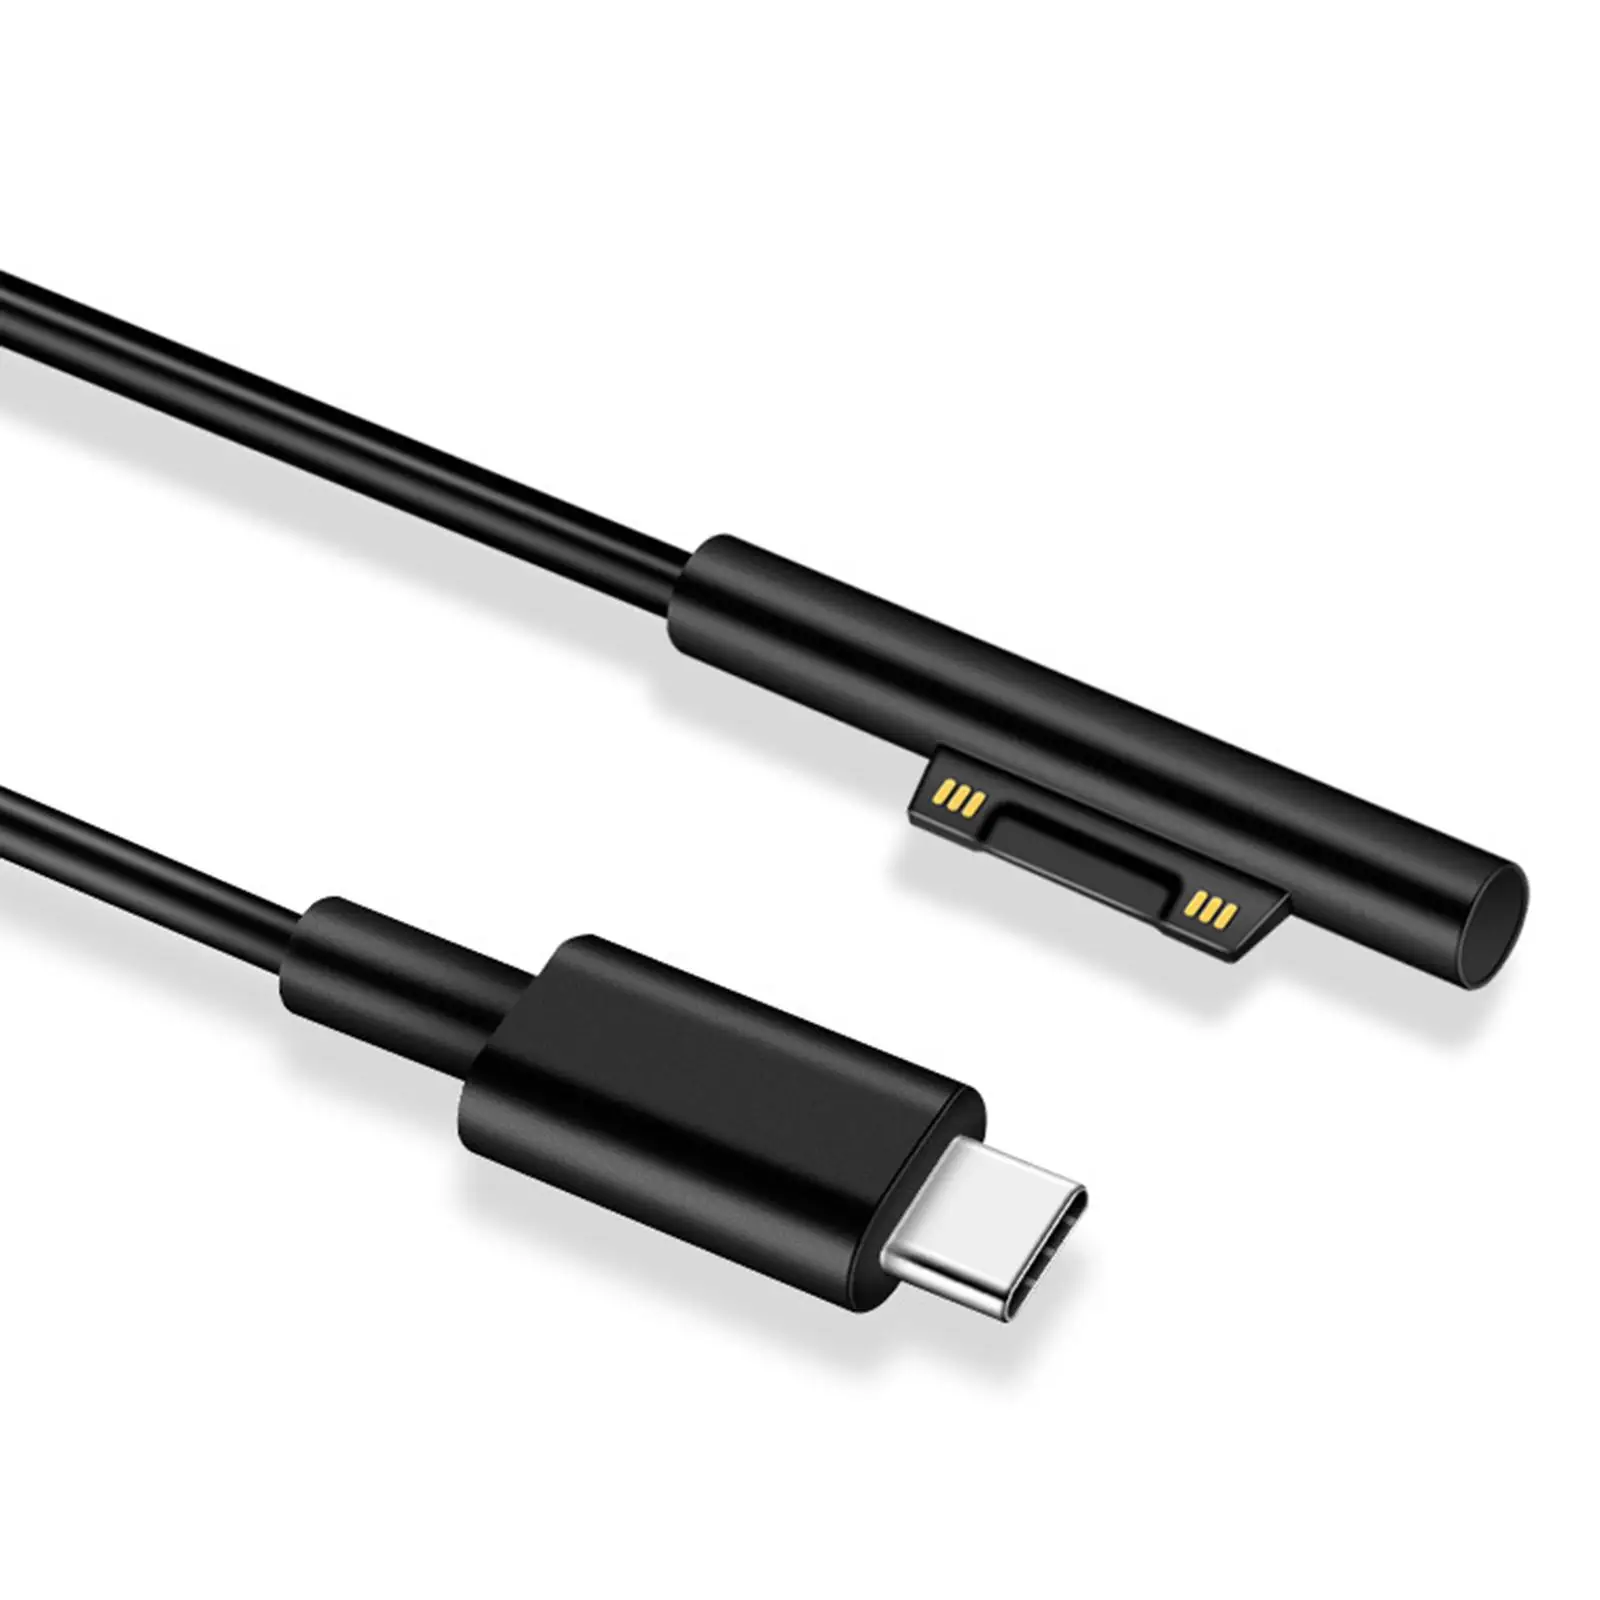 1Piece Laptop Charging Cable Type C PC Connector Durable 3A Power Accessories for Microsoft Surface Pro 3/4/5/6 Book 1/2 Laptop